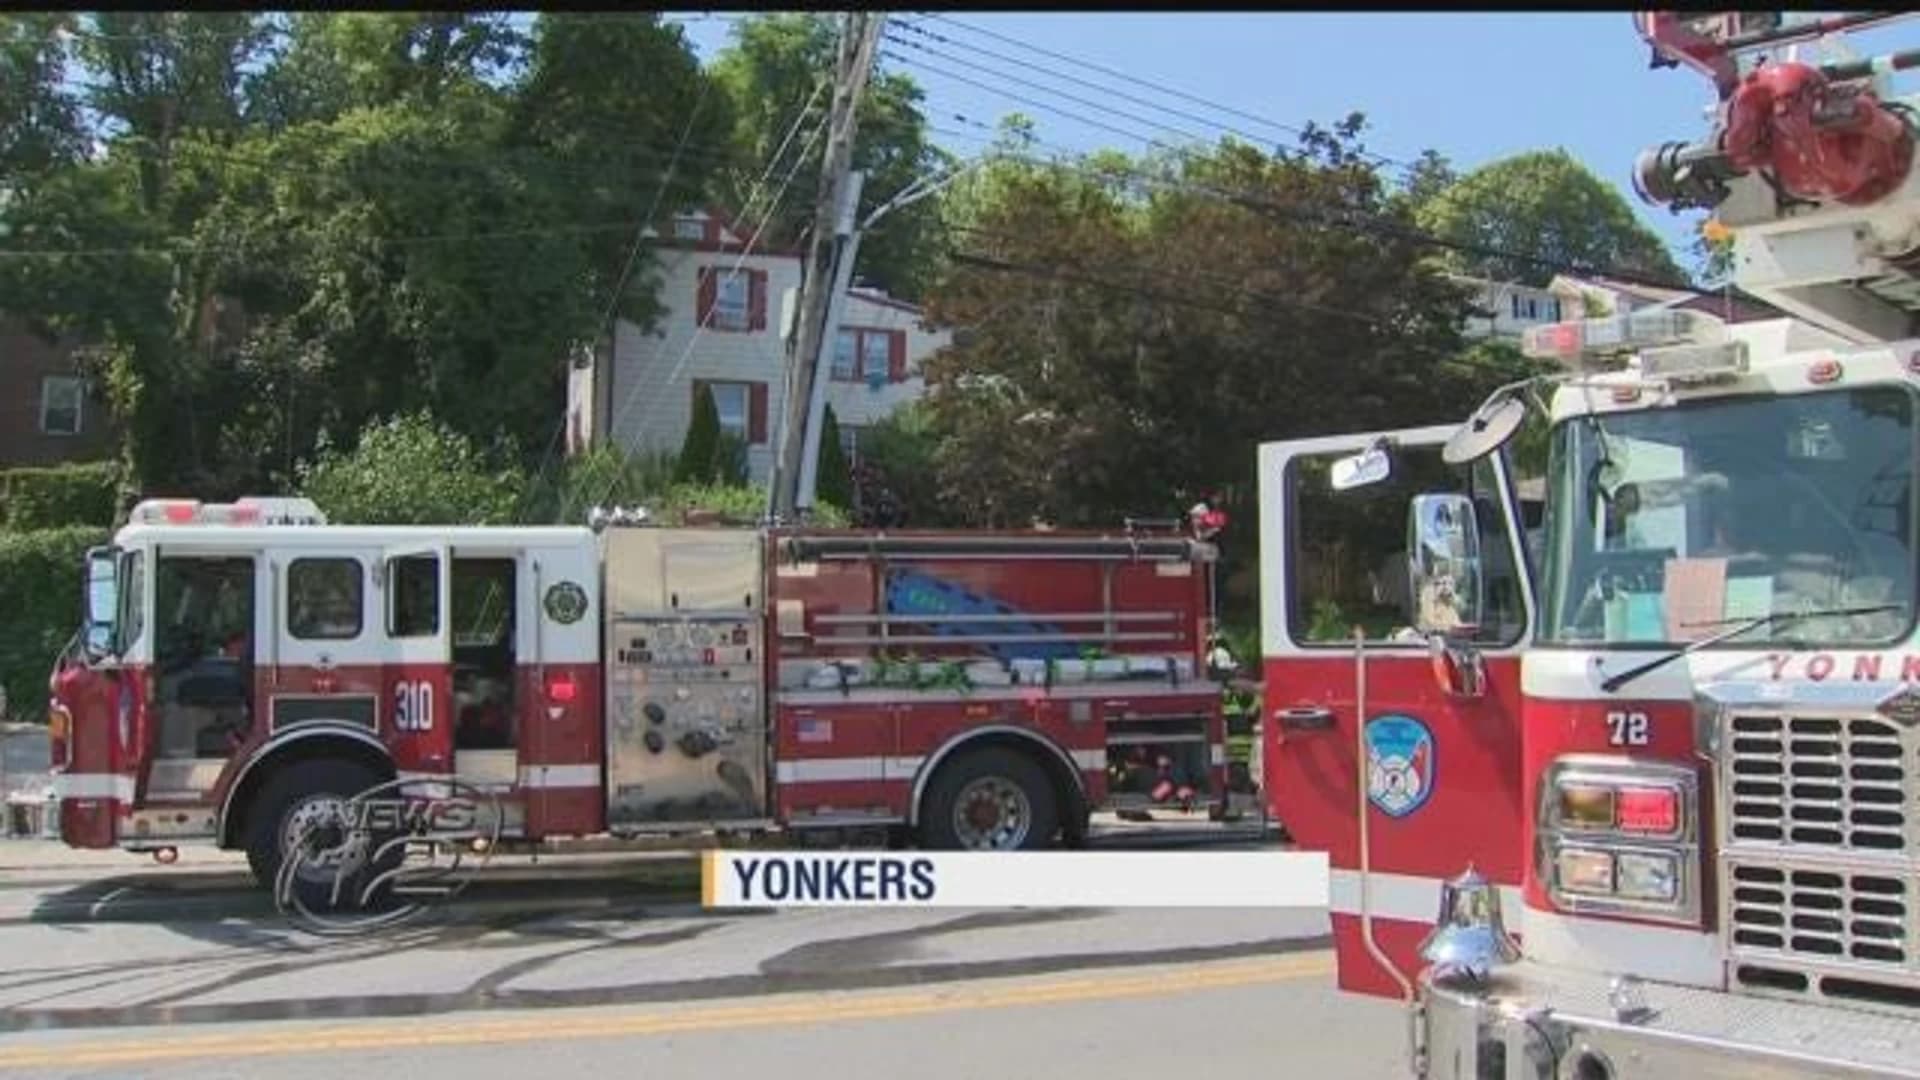 Fire sparks at home in Yonkers